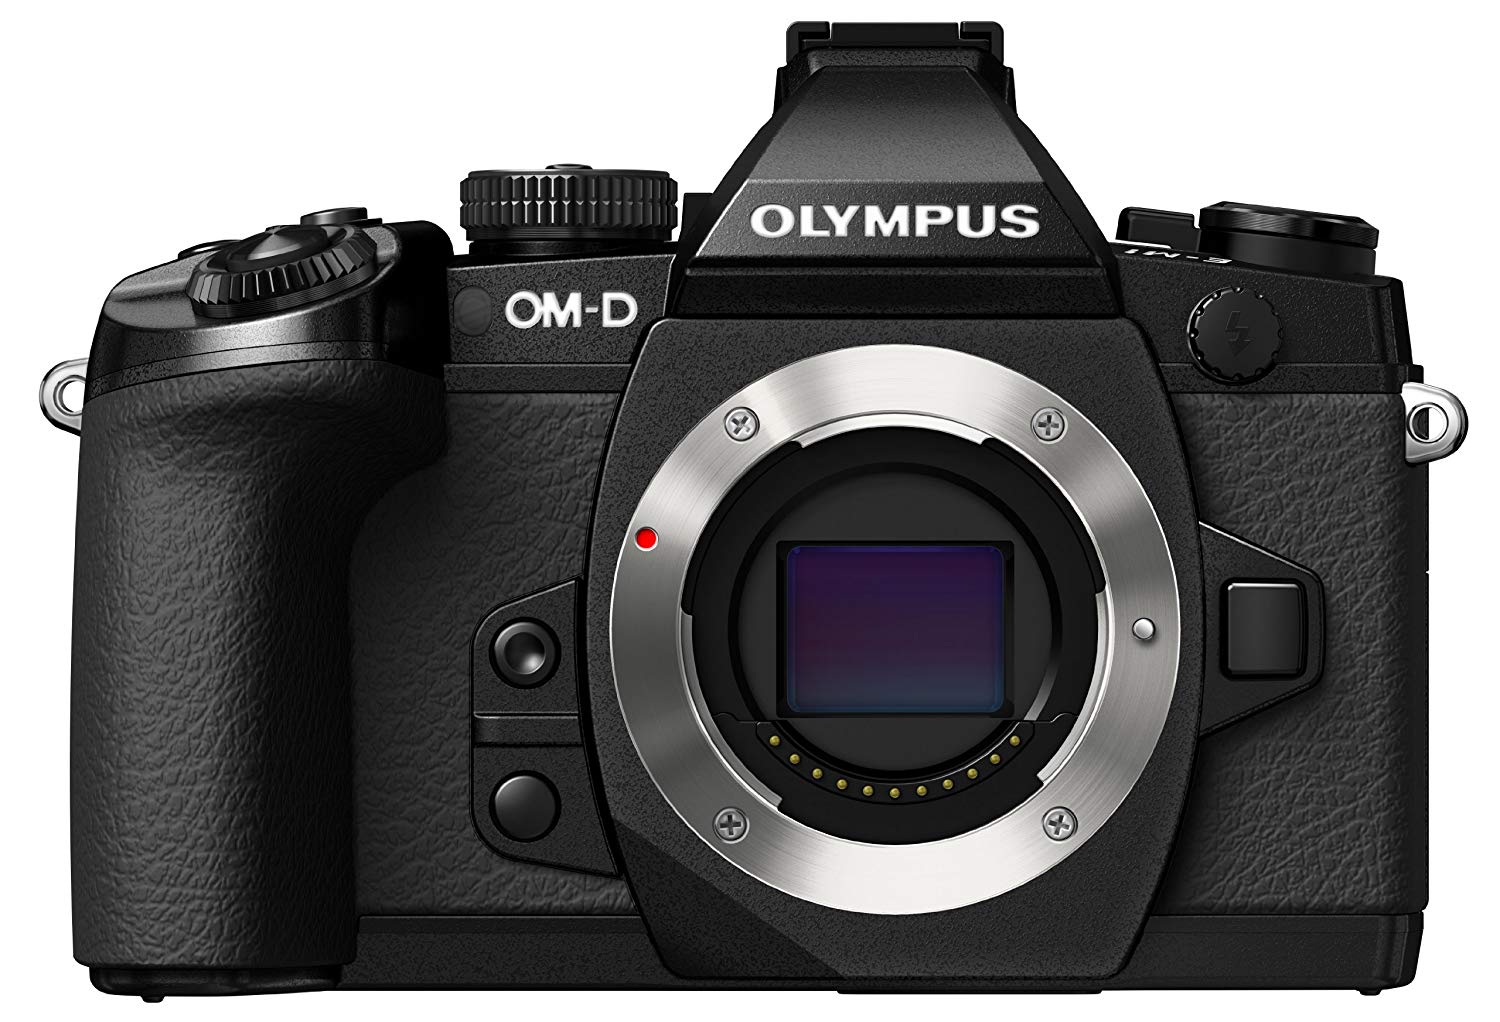 Olympus OM-D E-M1 Mirrorless Digital Camera with 16MP and 3-Inch LCD (Body Only) (Black)